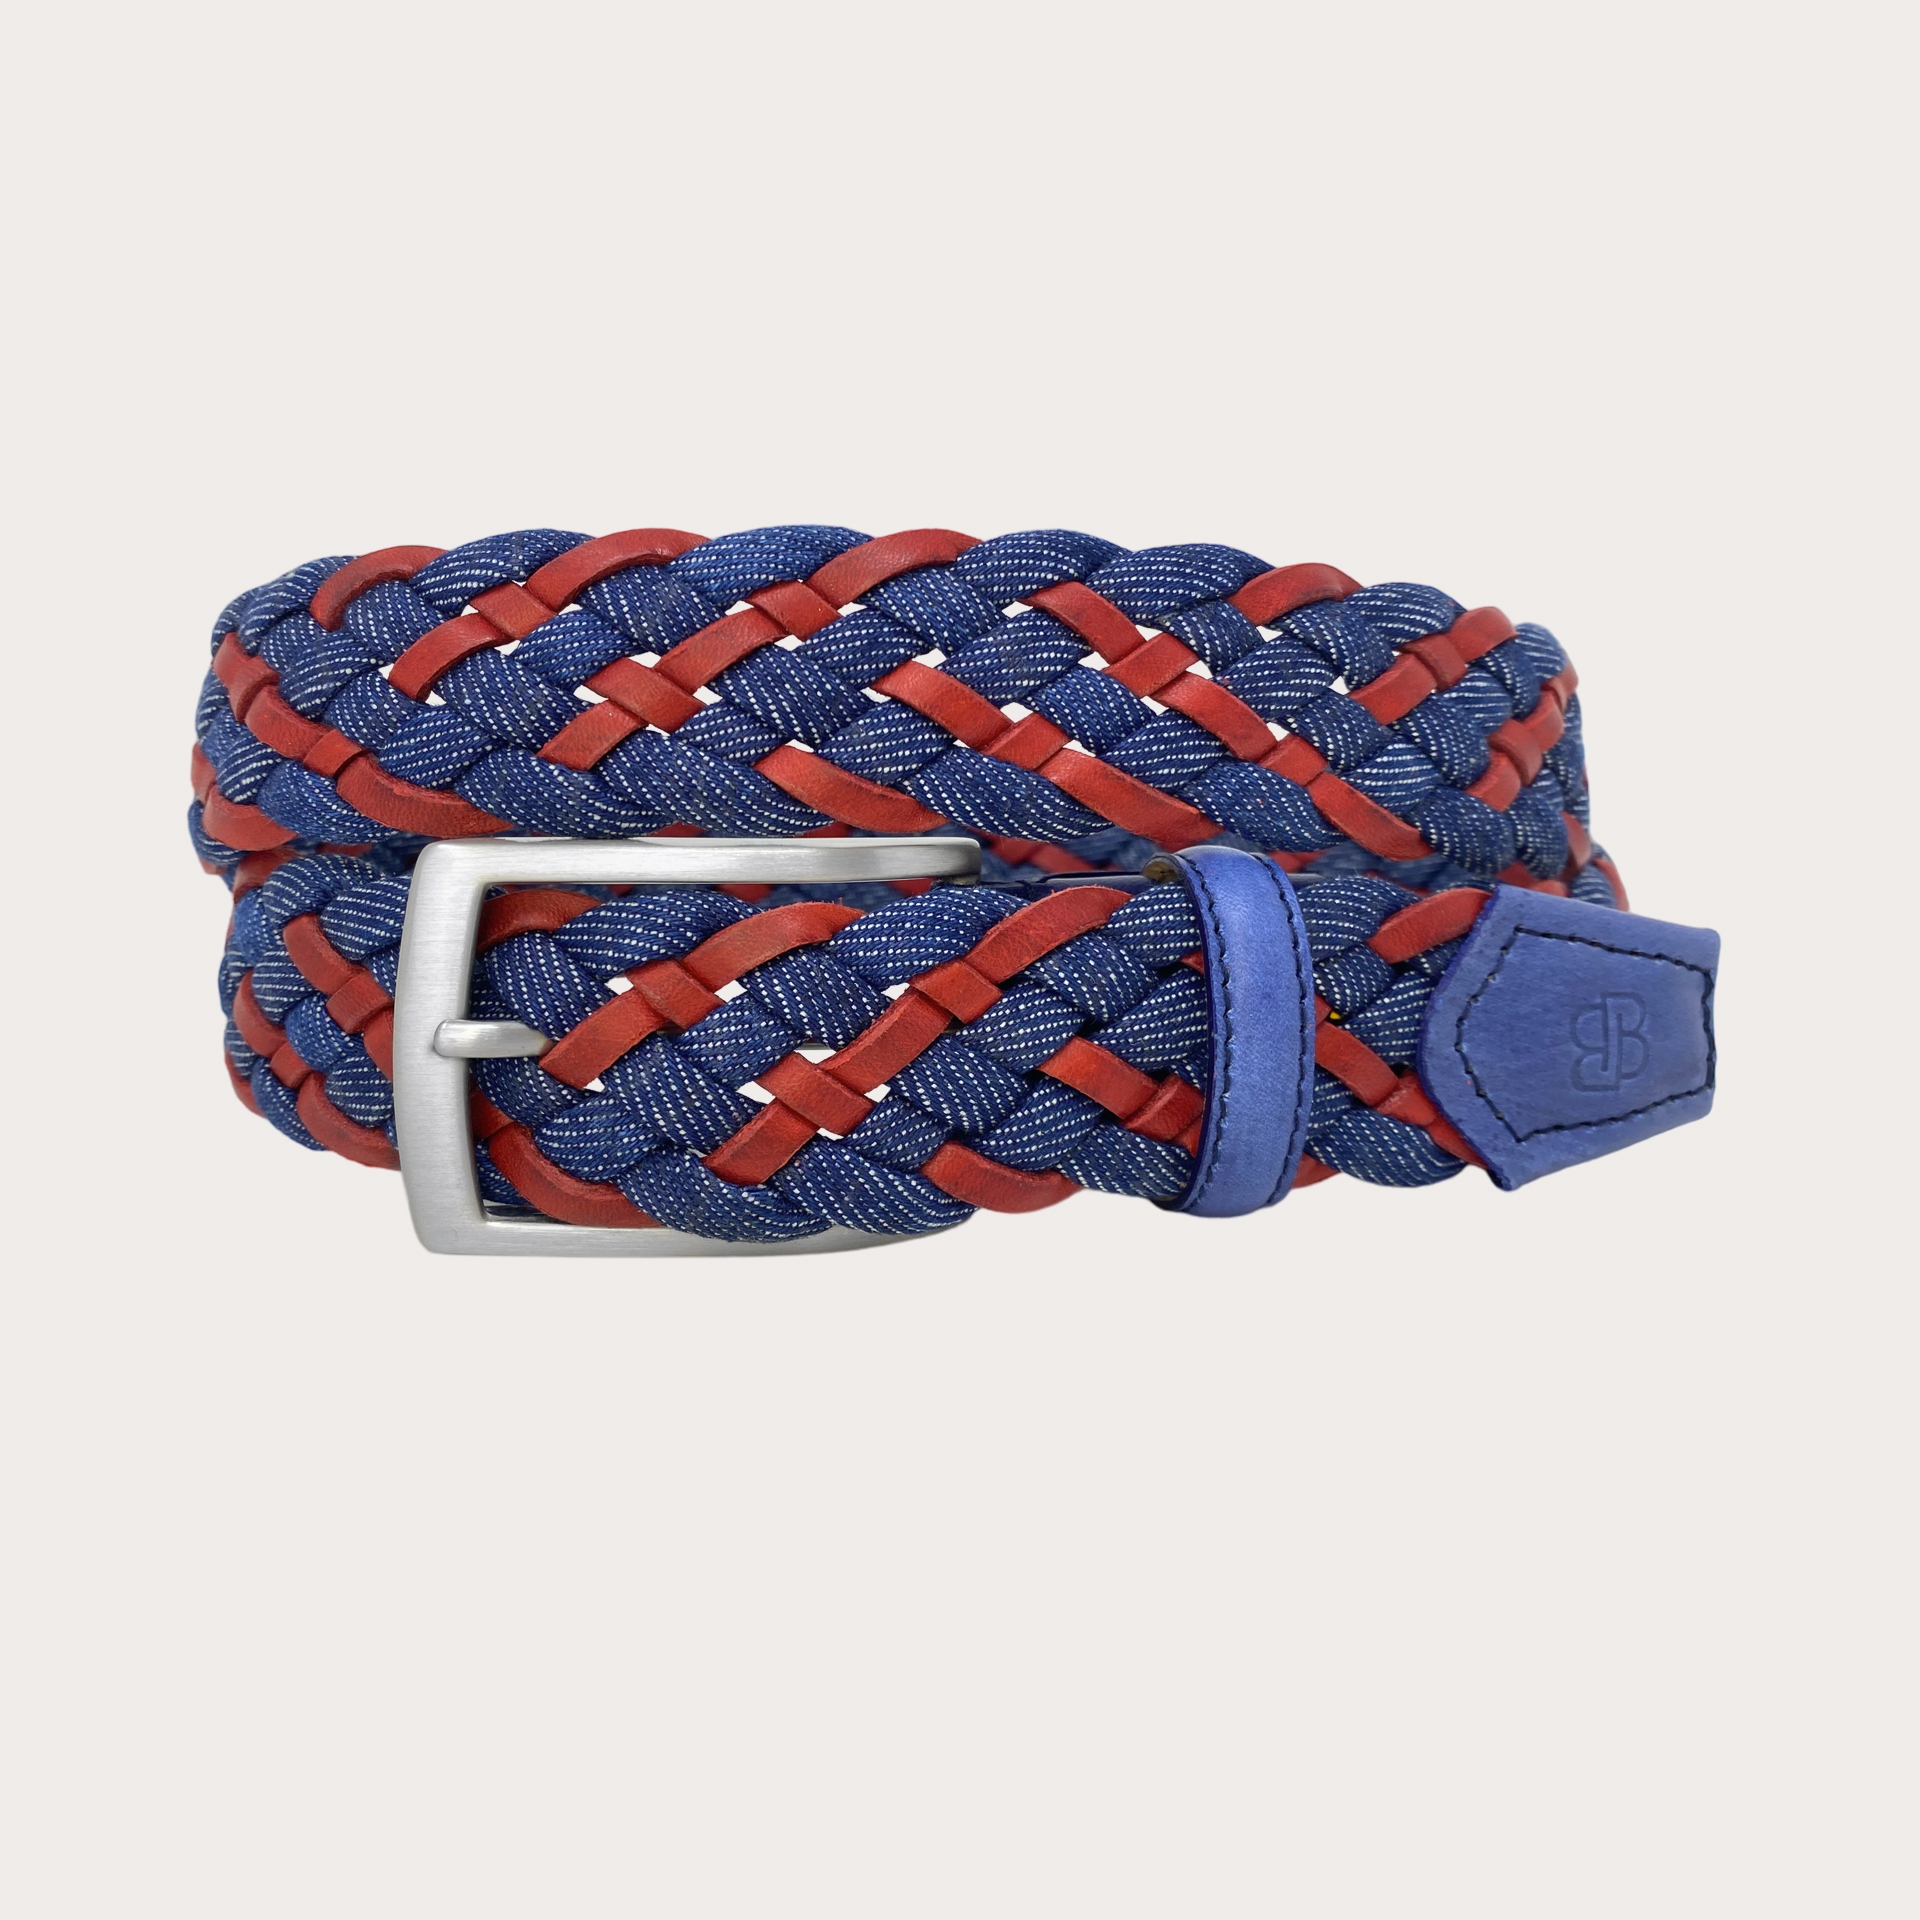 BRUCLE Braided jeans belt blue and red leather